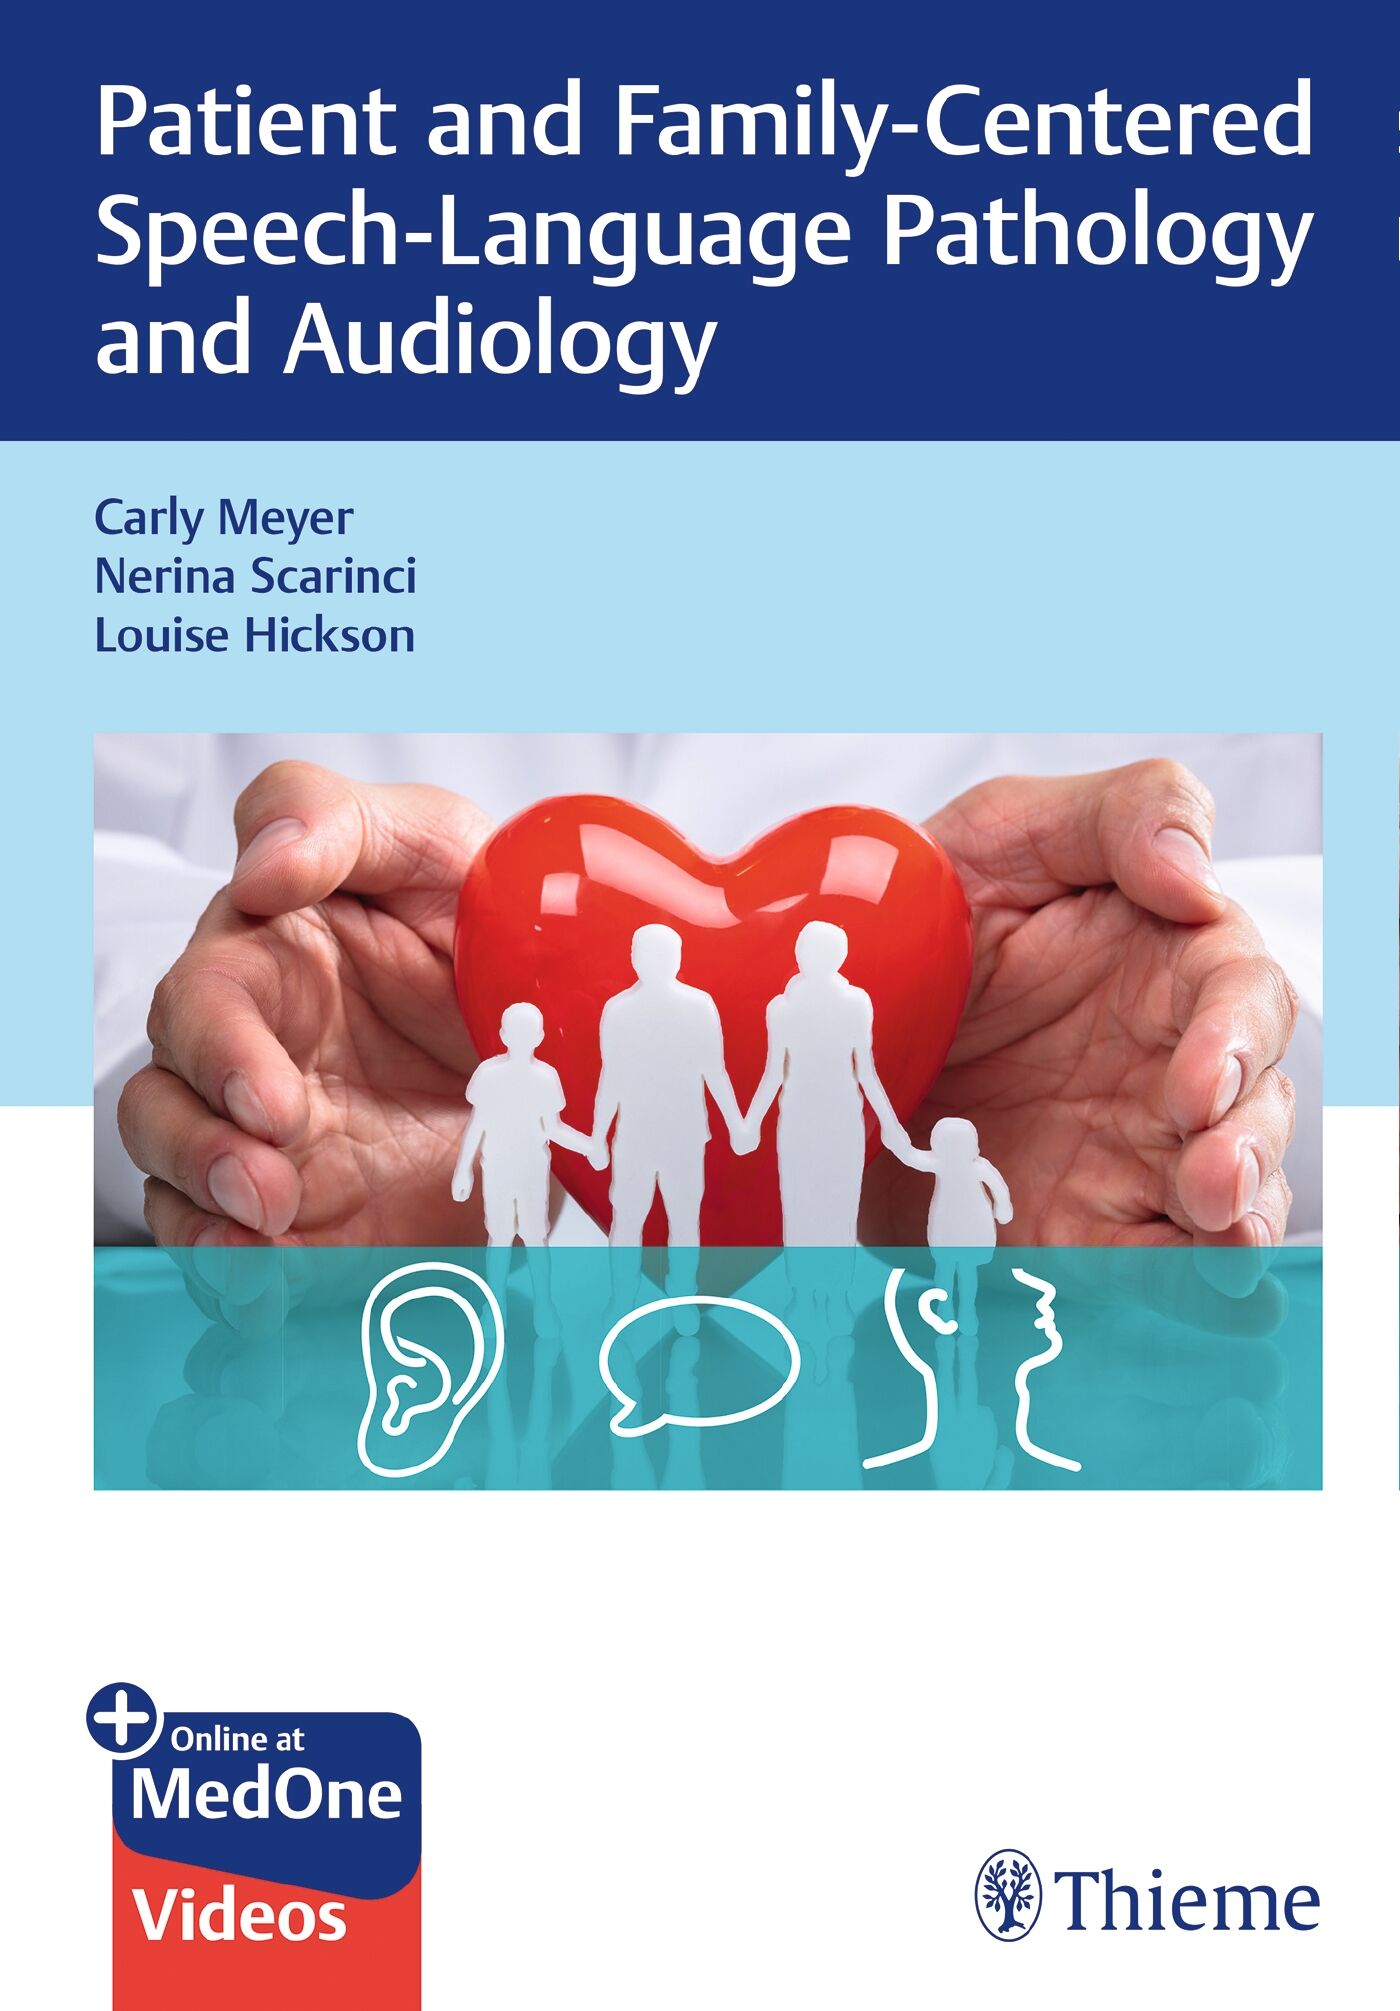 Patient and Family-Centered Speech-Language Pathology and Audiology, 9781626235038